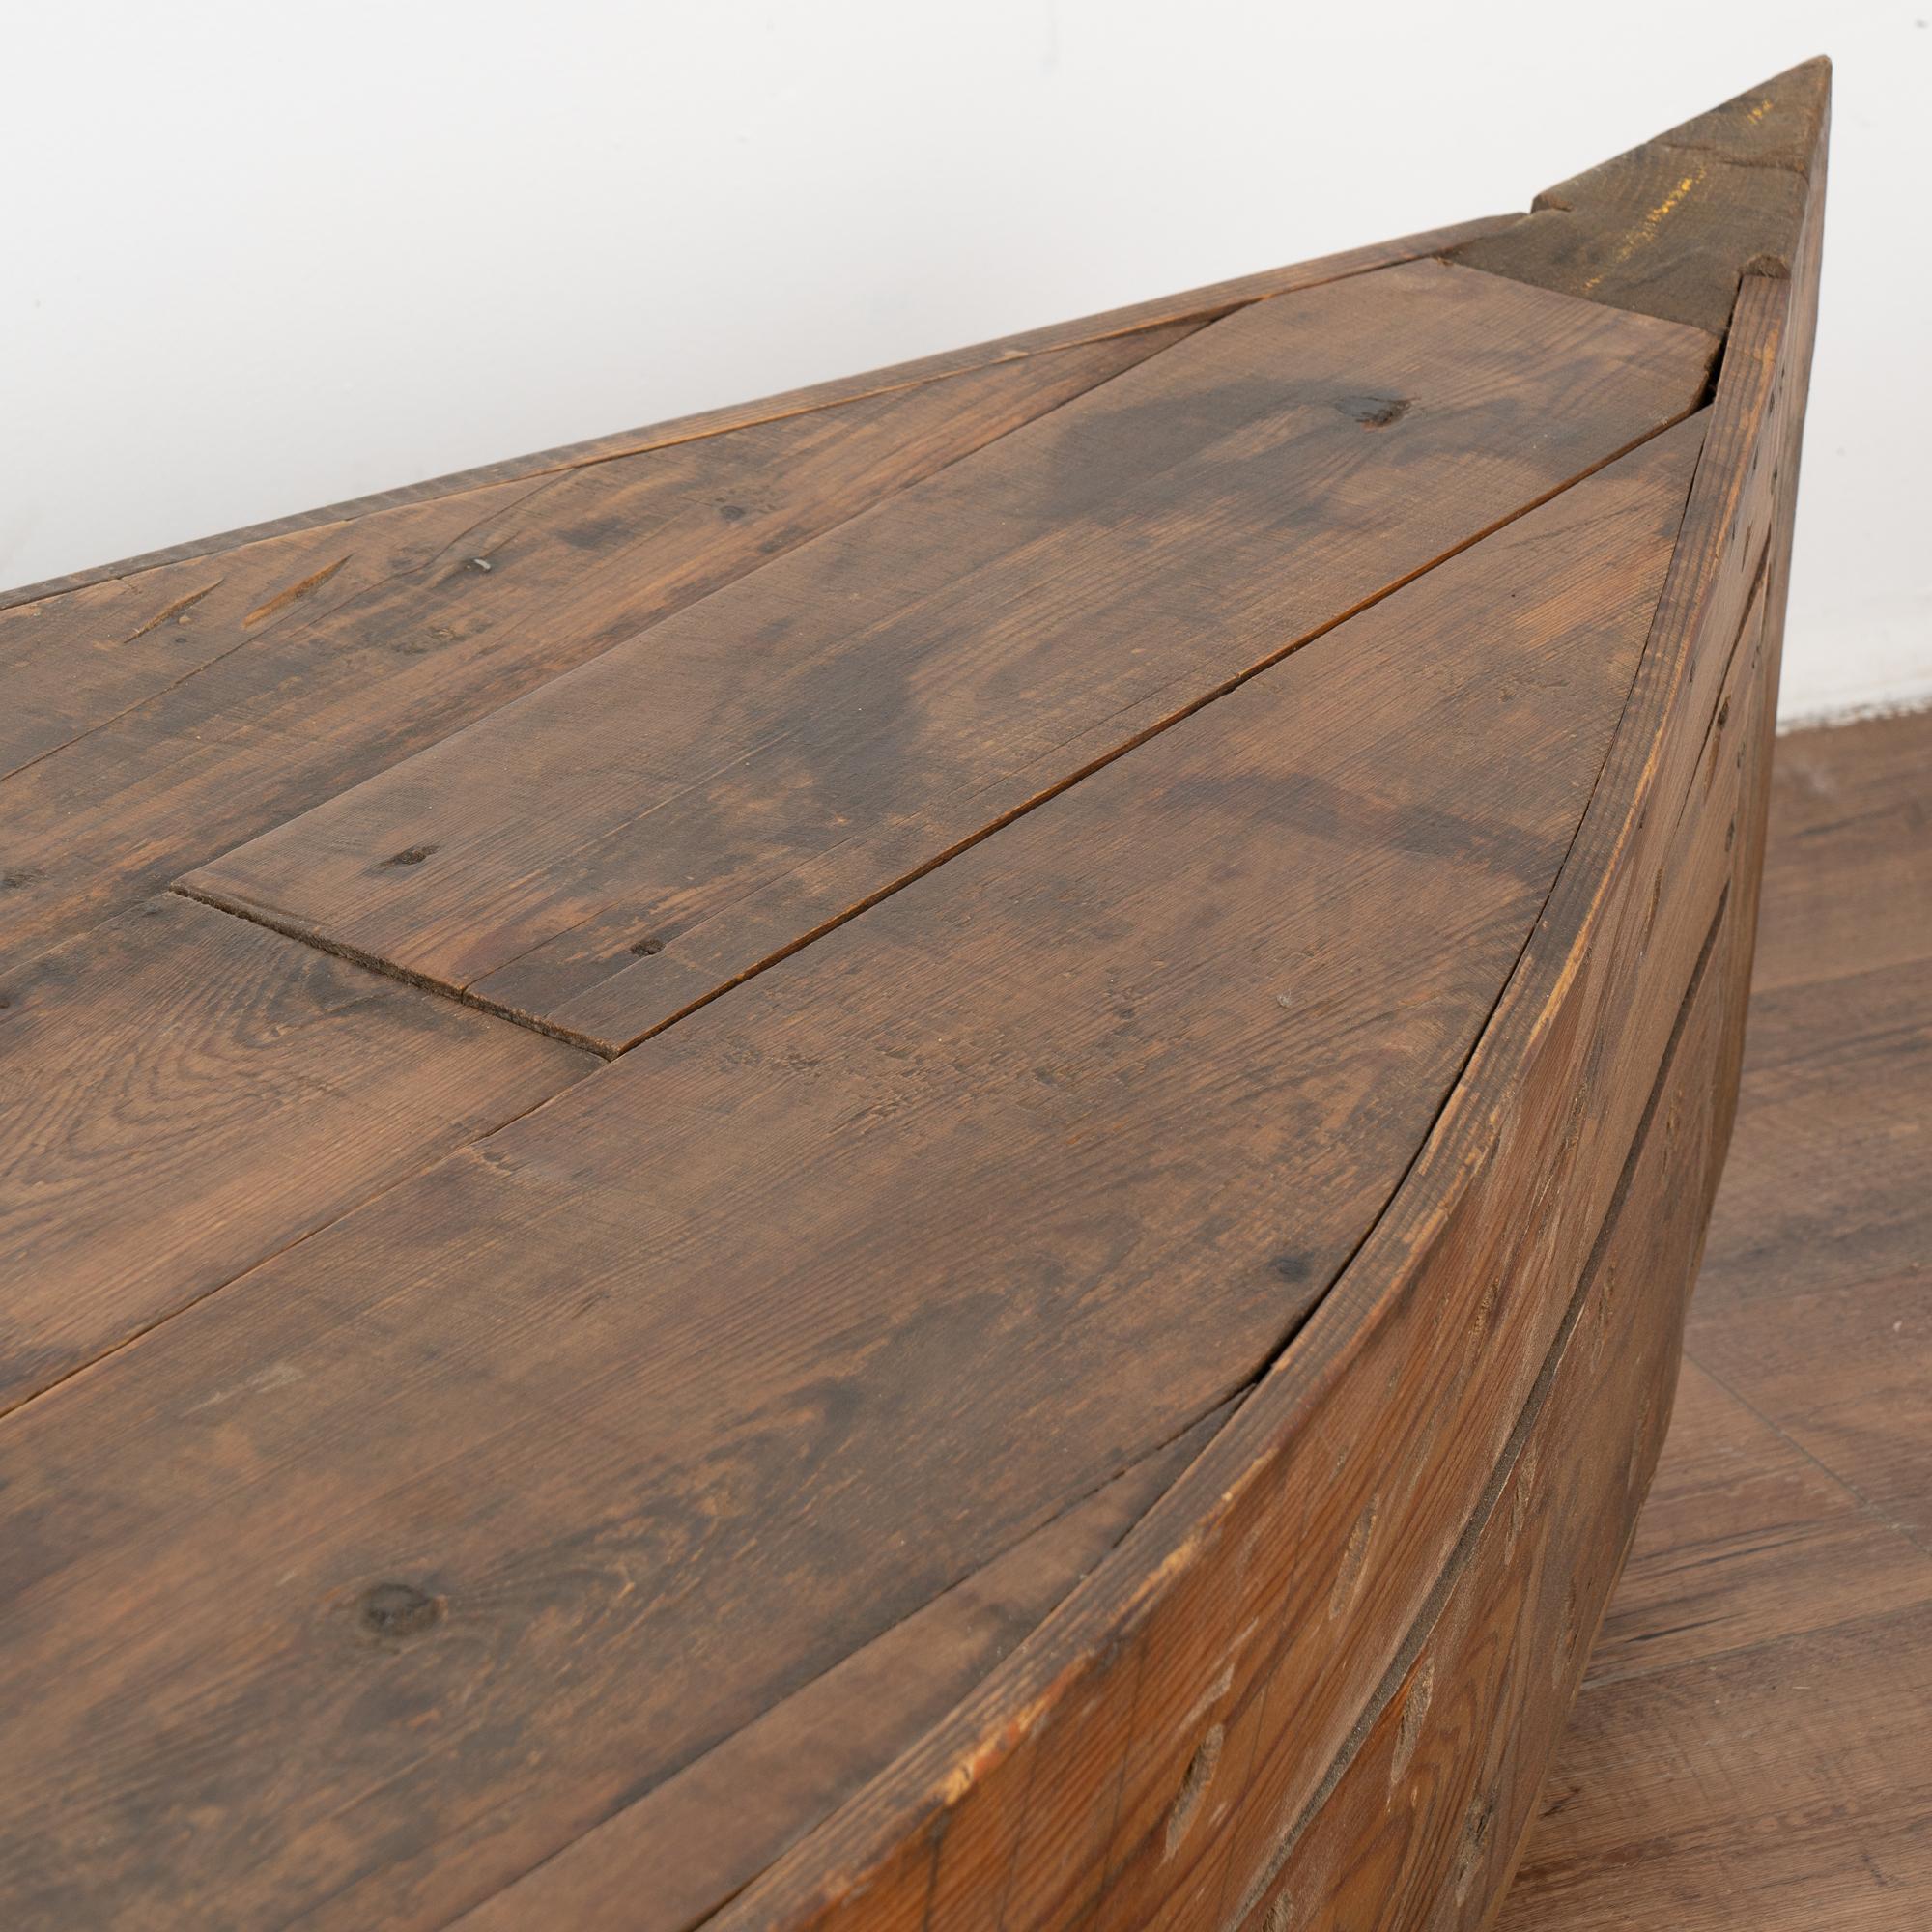 Rustic Decorative Model Boat With Holes For Fishing or Large Creel, circa 1940 For Sale 4